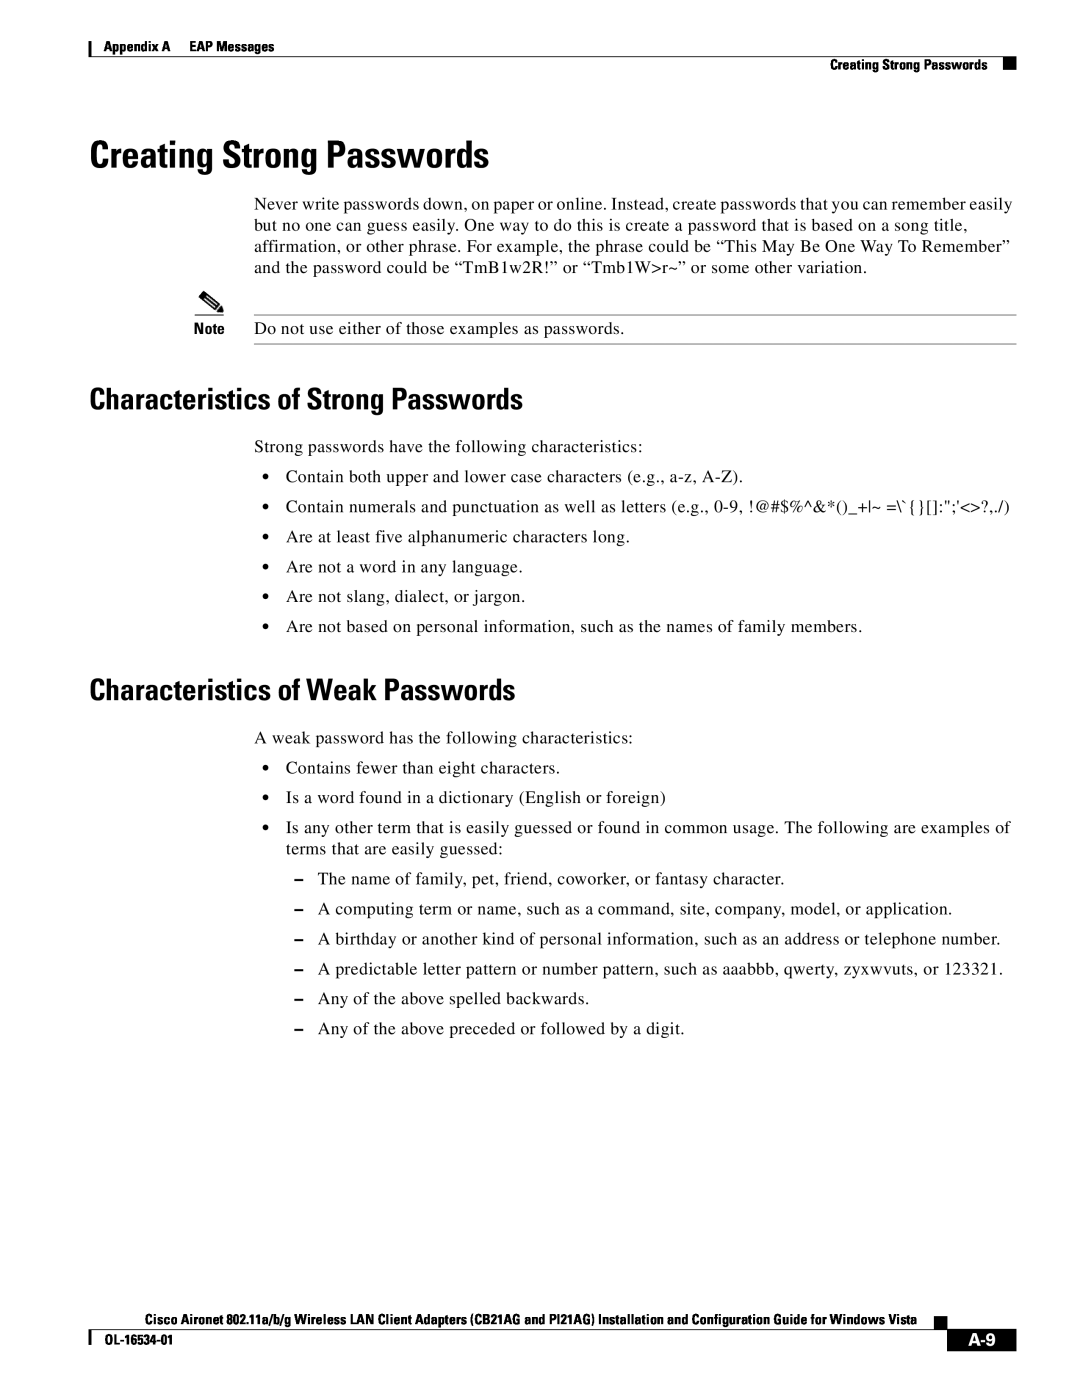 Cisco Systems CB21AG Creating Strong Passwords, Characteristics of Strong Passwords, Characteristics of Weak Passwords 